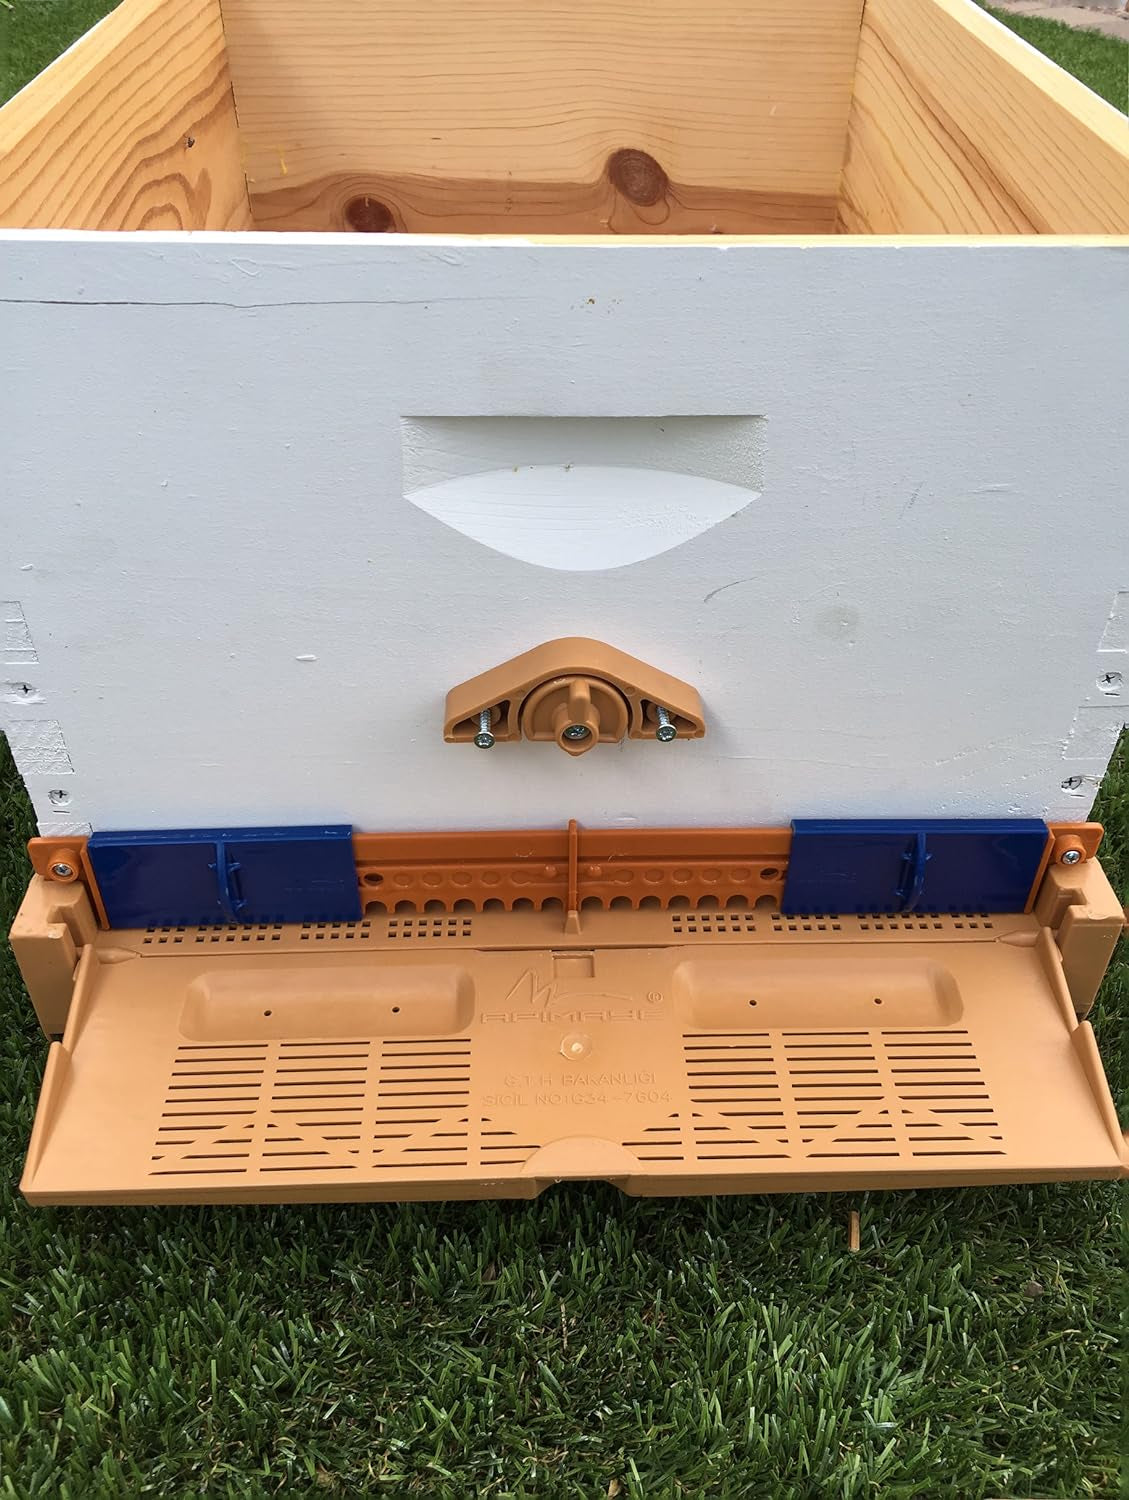 Premium Screened Bottom Board 10 Frame Langstroth for Wood Hives with Built in Pollen Trap and Pollen Drawer, Entrance Reducers and Ventilation System for Moisture Control